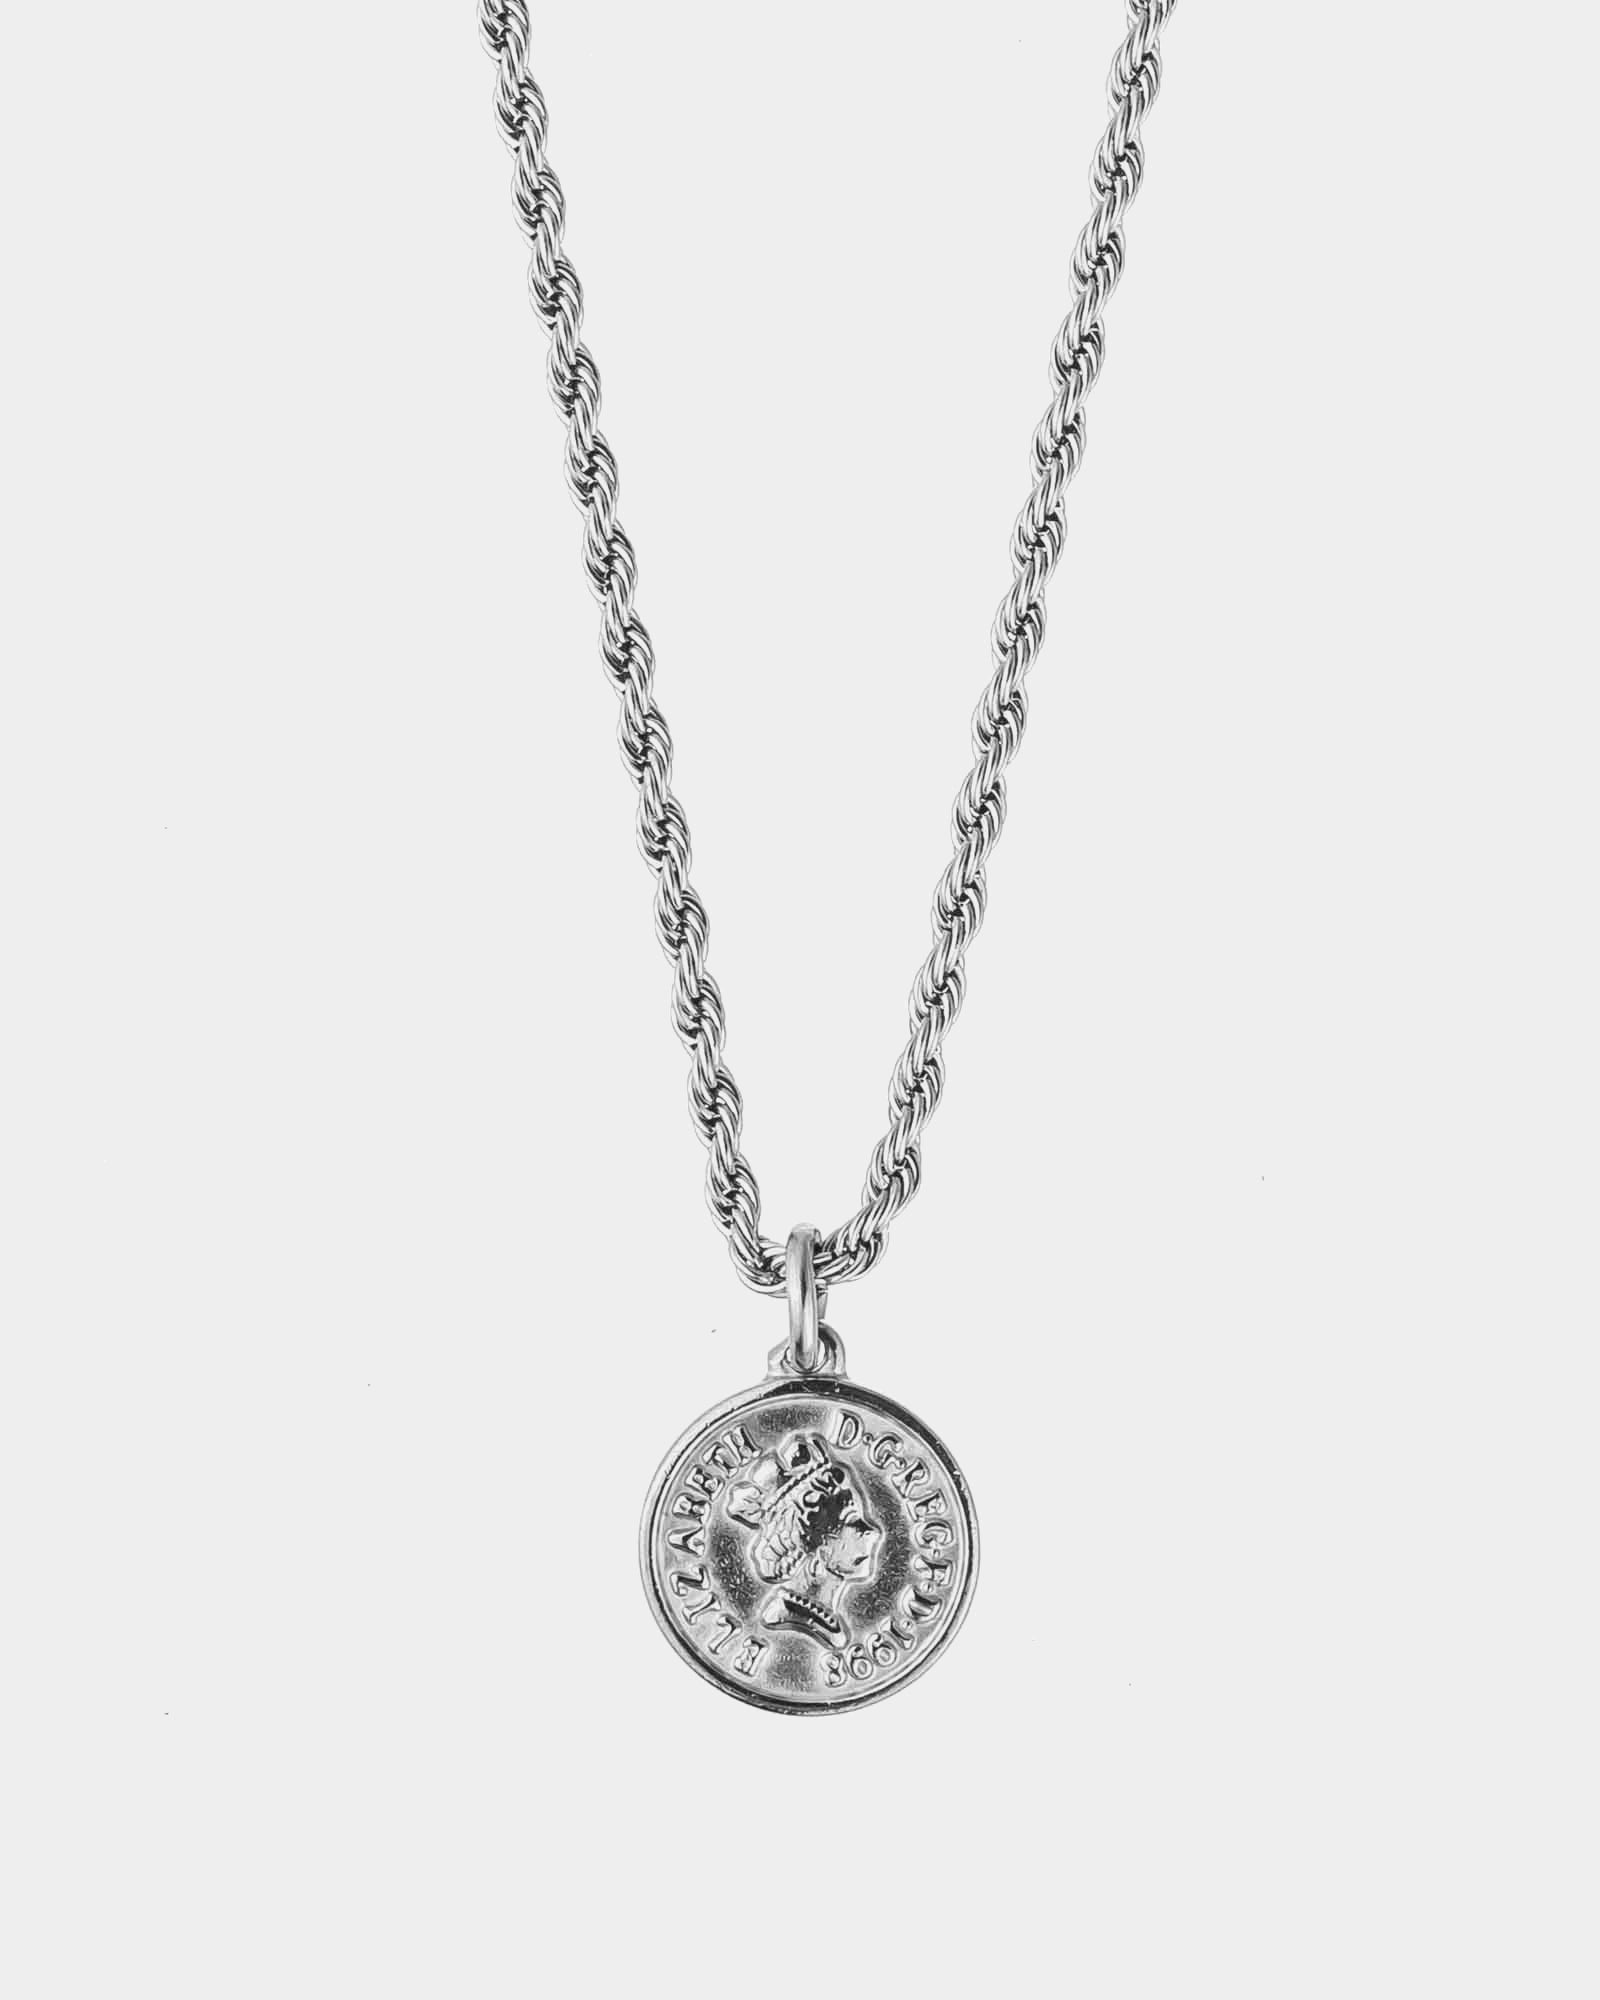 Elizabeth Coin - Stainless Steel Necklace with 'Elizabeth Coin' Pendant - Online Unissex Jewelry - Dicci